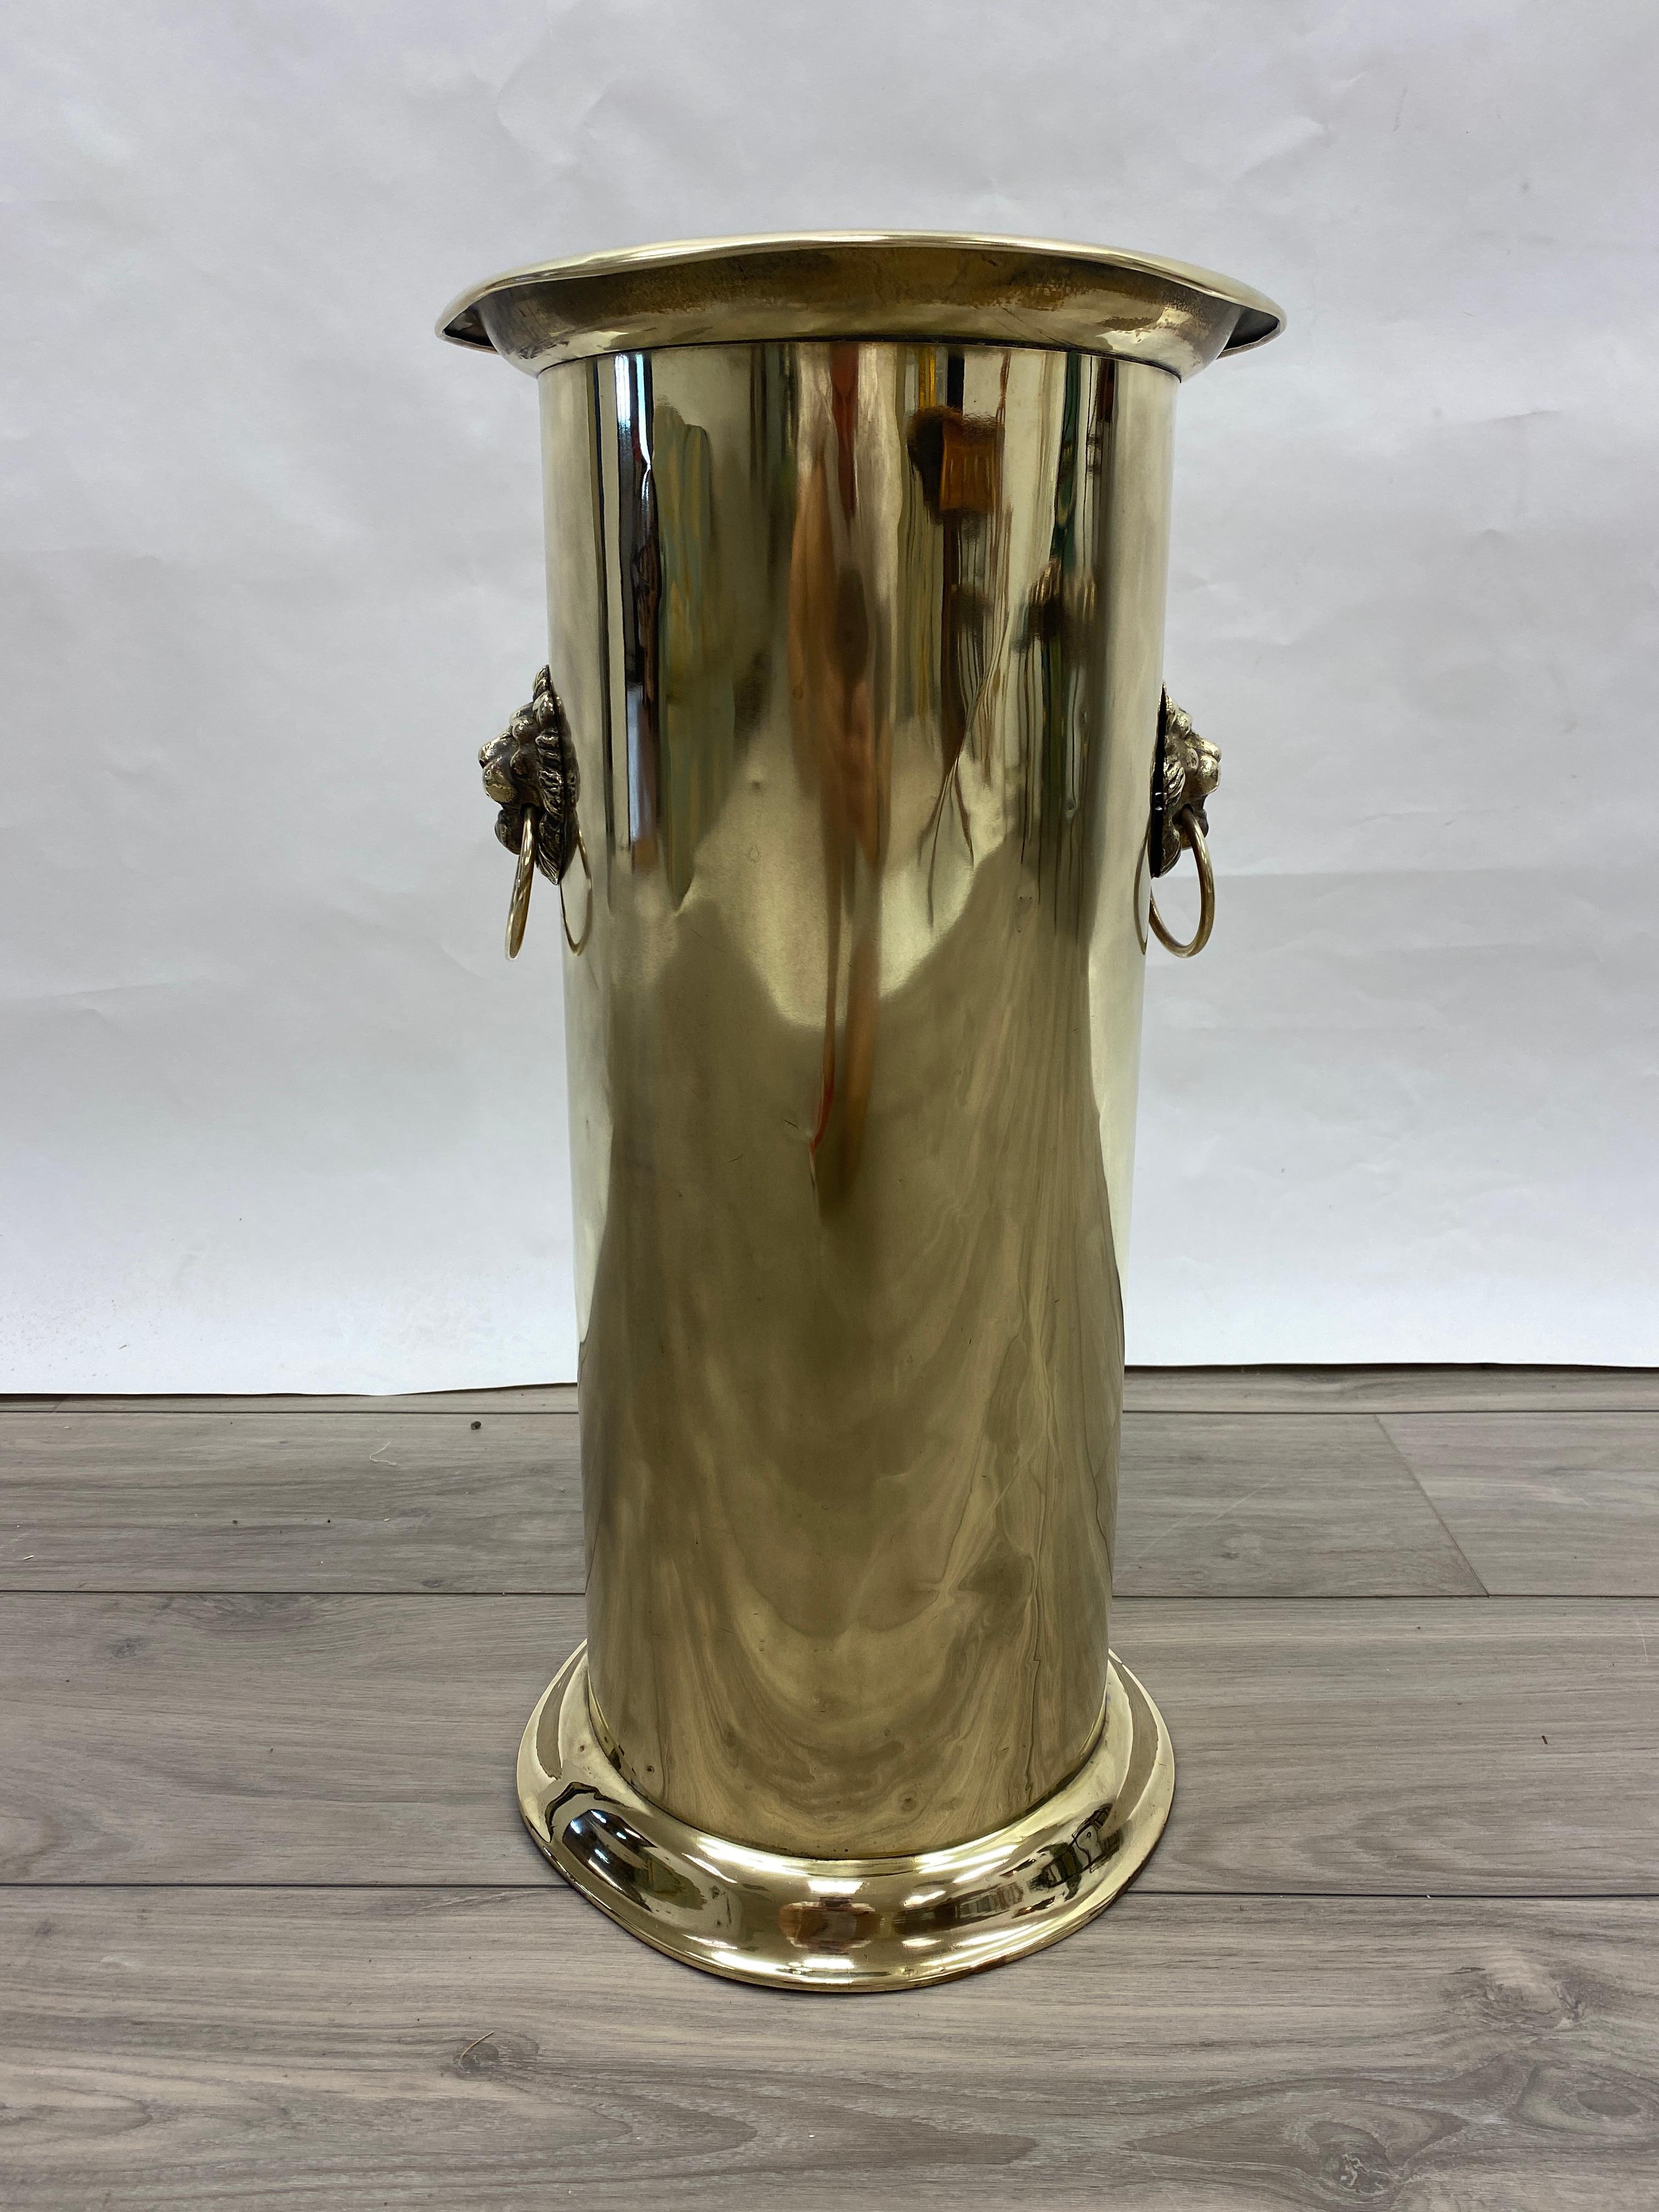 A handsome vintage solid brass umbrella stand adorned with lions head ring pulls on both sides. This one is well used with dents and wear from 100 years of umbrella use.